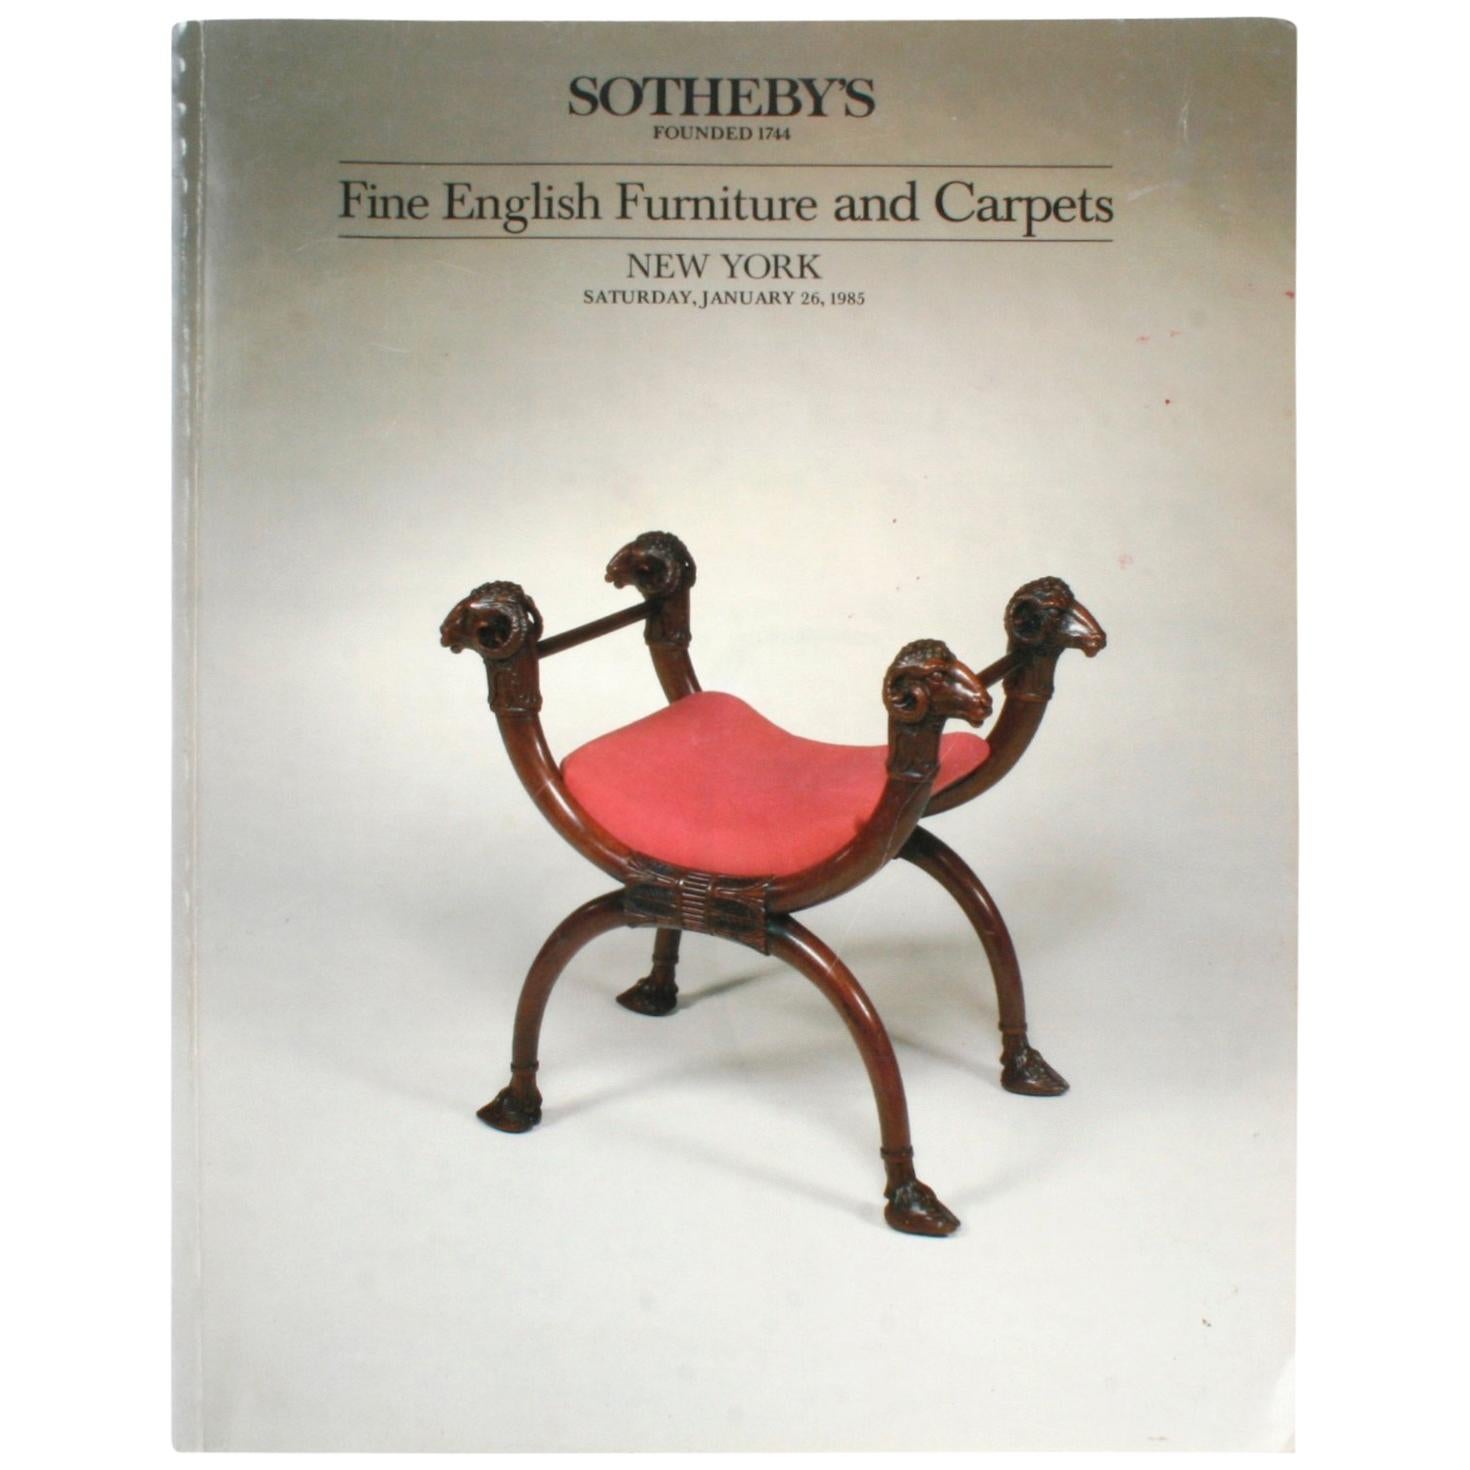 Sotheby's Fine English Furniture and Carpets